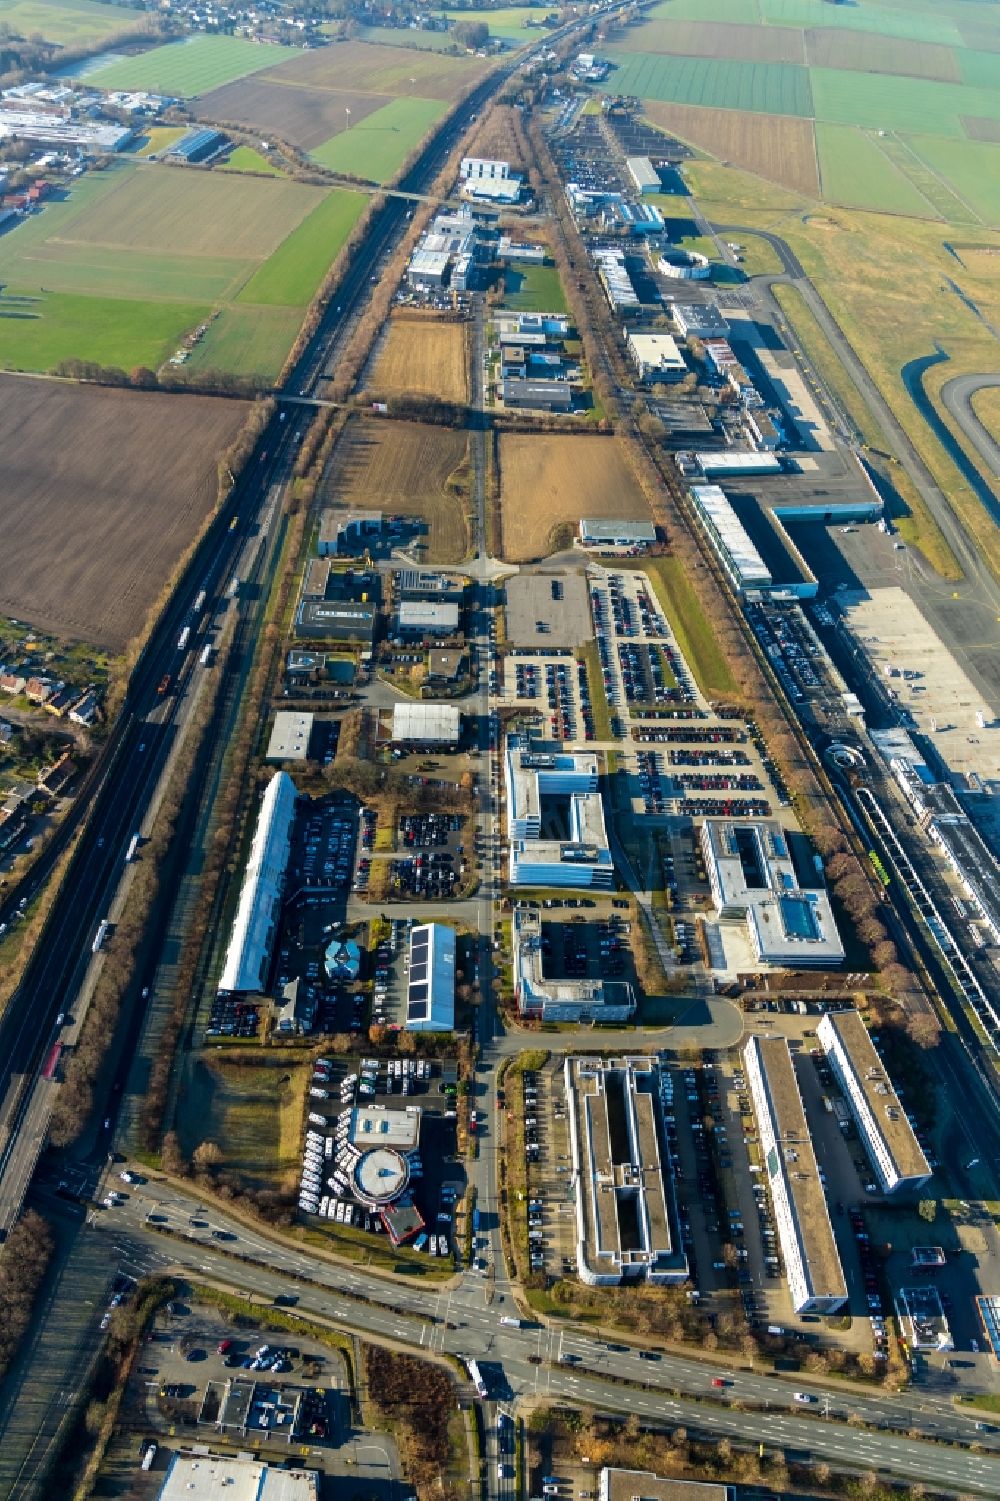 Holzwickede from the bird's eye view: Industrial estate and company settlement overlooking the airport in the district Brackel in Holzwickede in the state North Rhine-Westphalia, Germany